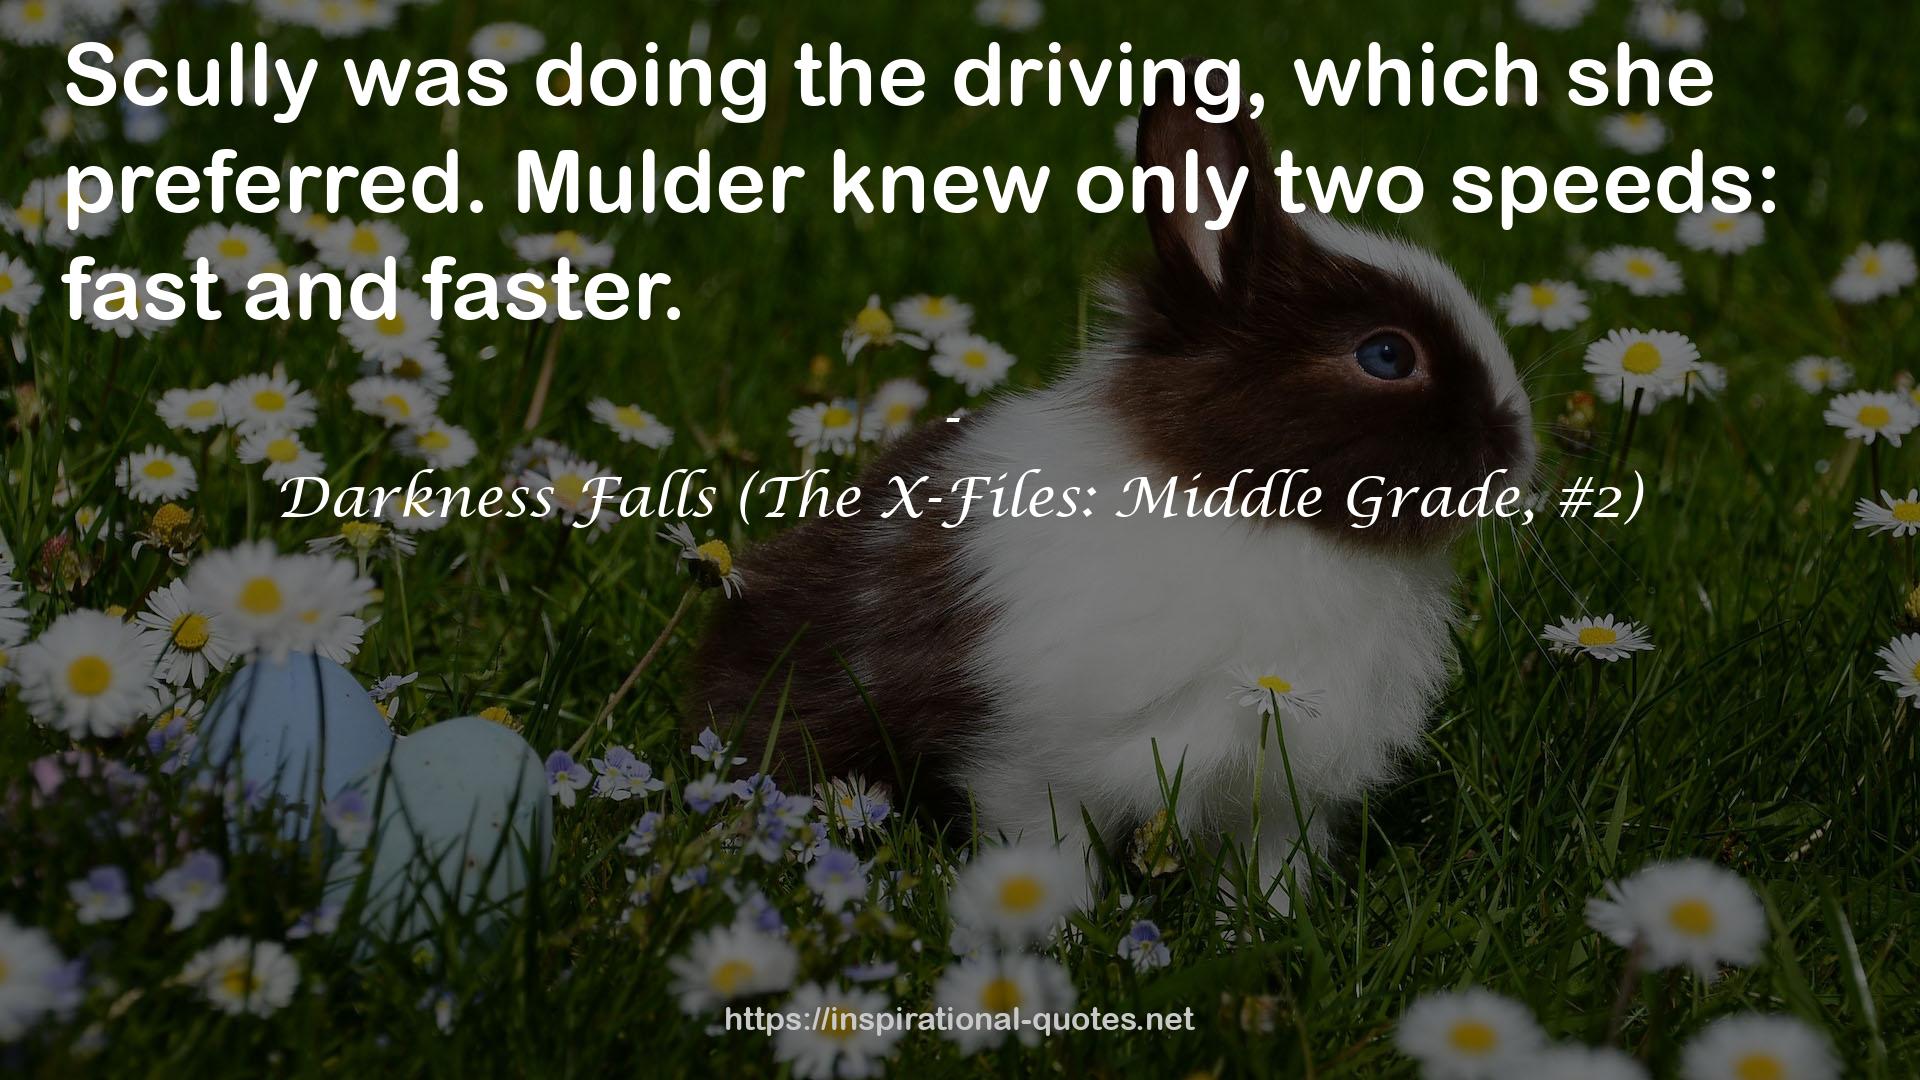 Darkness Falls (The X-Files: Middle Grade, #2) QUOTES